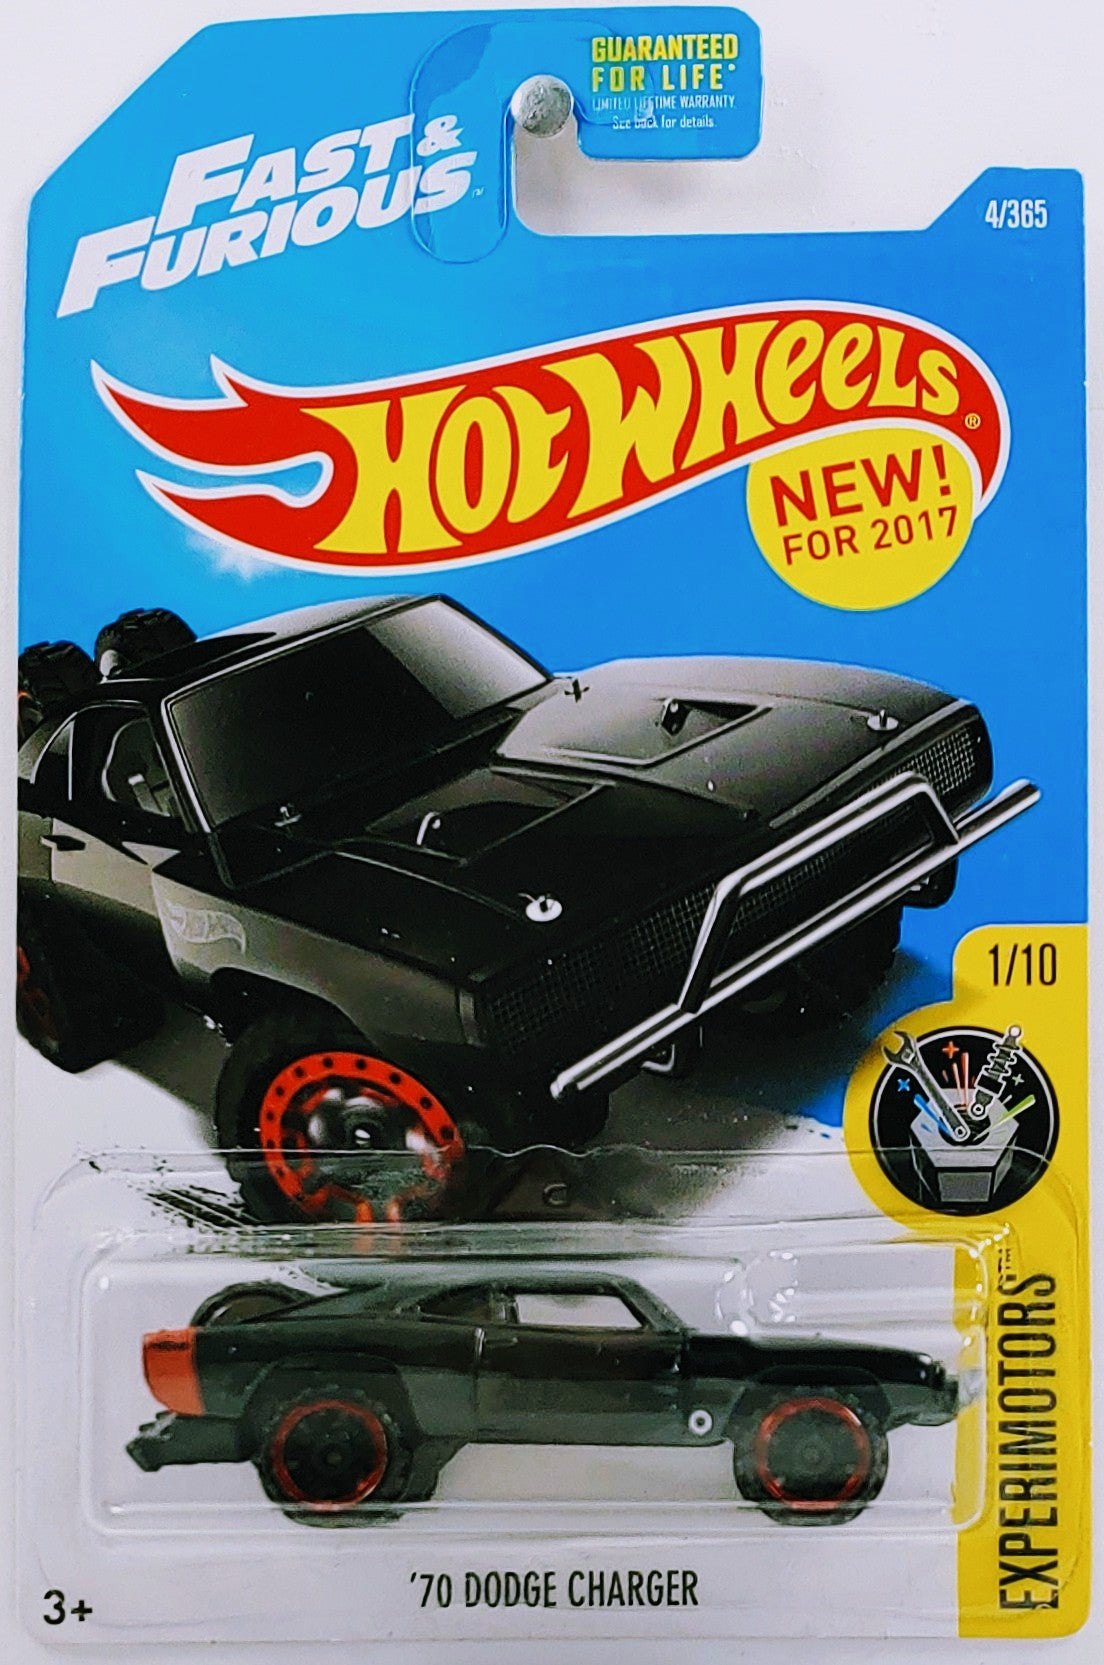 Hot Wheels 2017 - Collector # 004/365 - Experimotors 1/10 - New Models - '70 Dodge Charger (Fast & Furious) - Black - USA Card - ERROR: Chassis Mis-Aligned